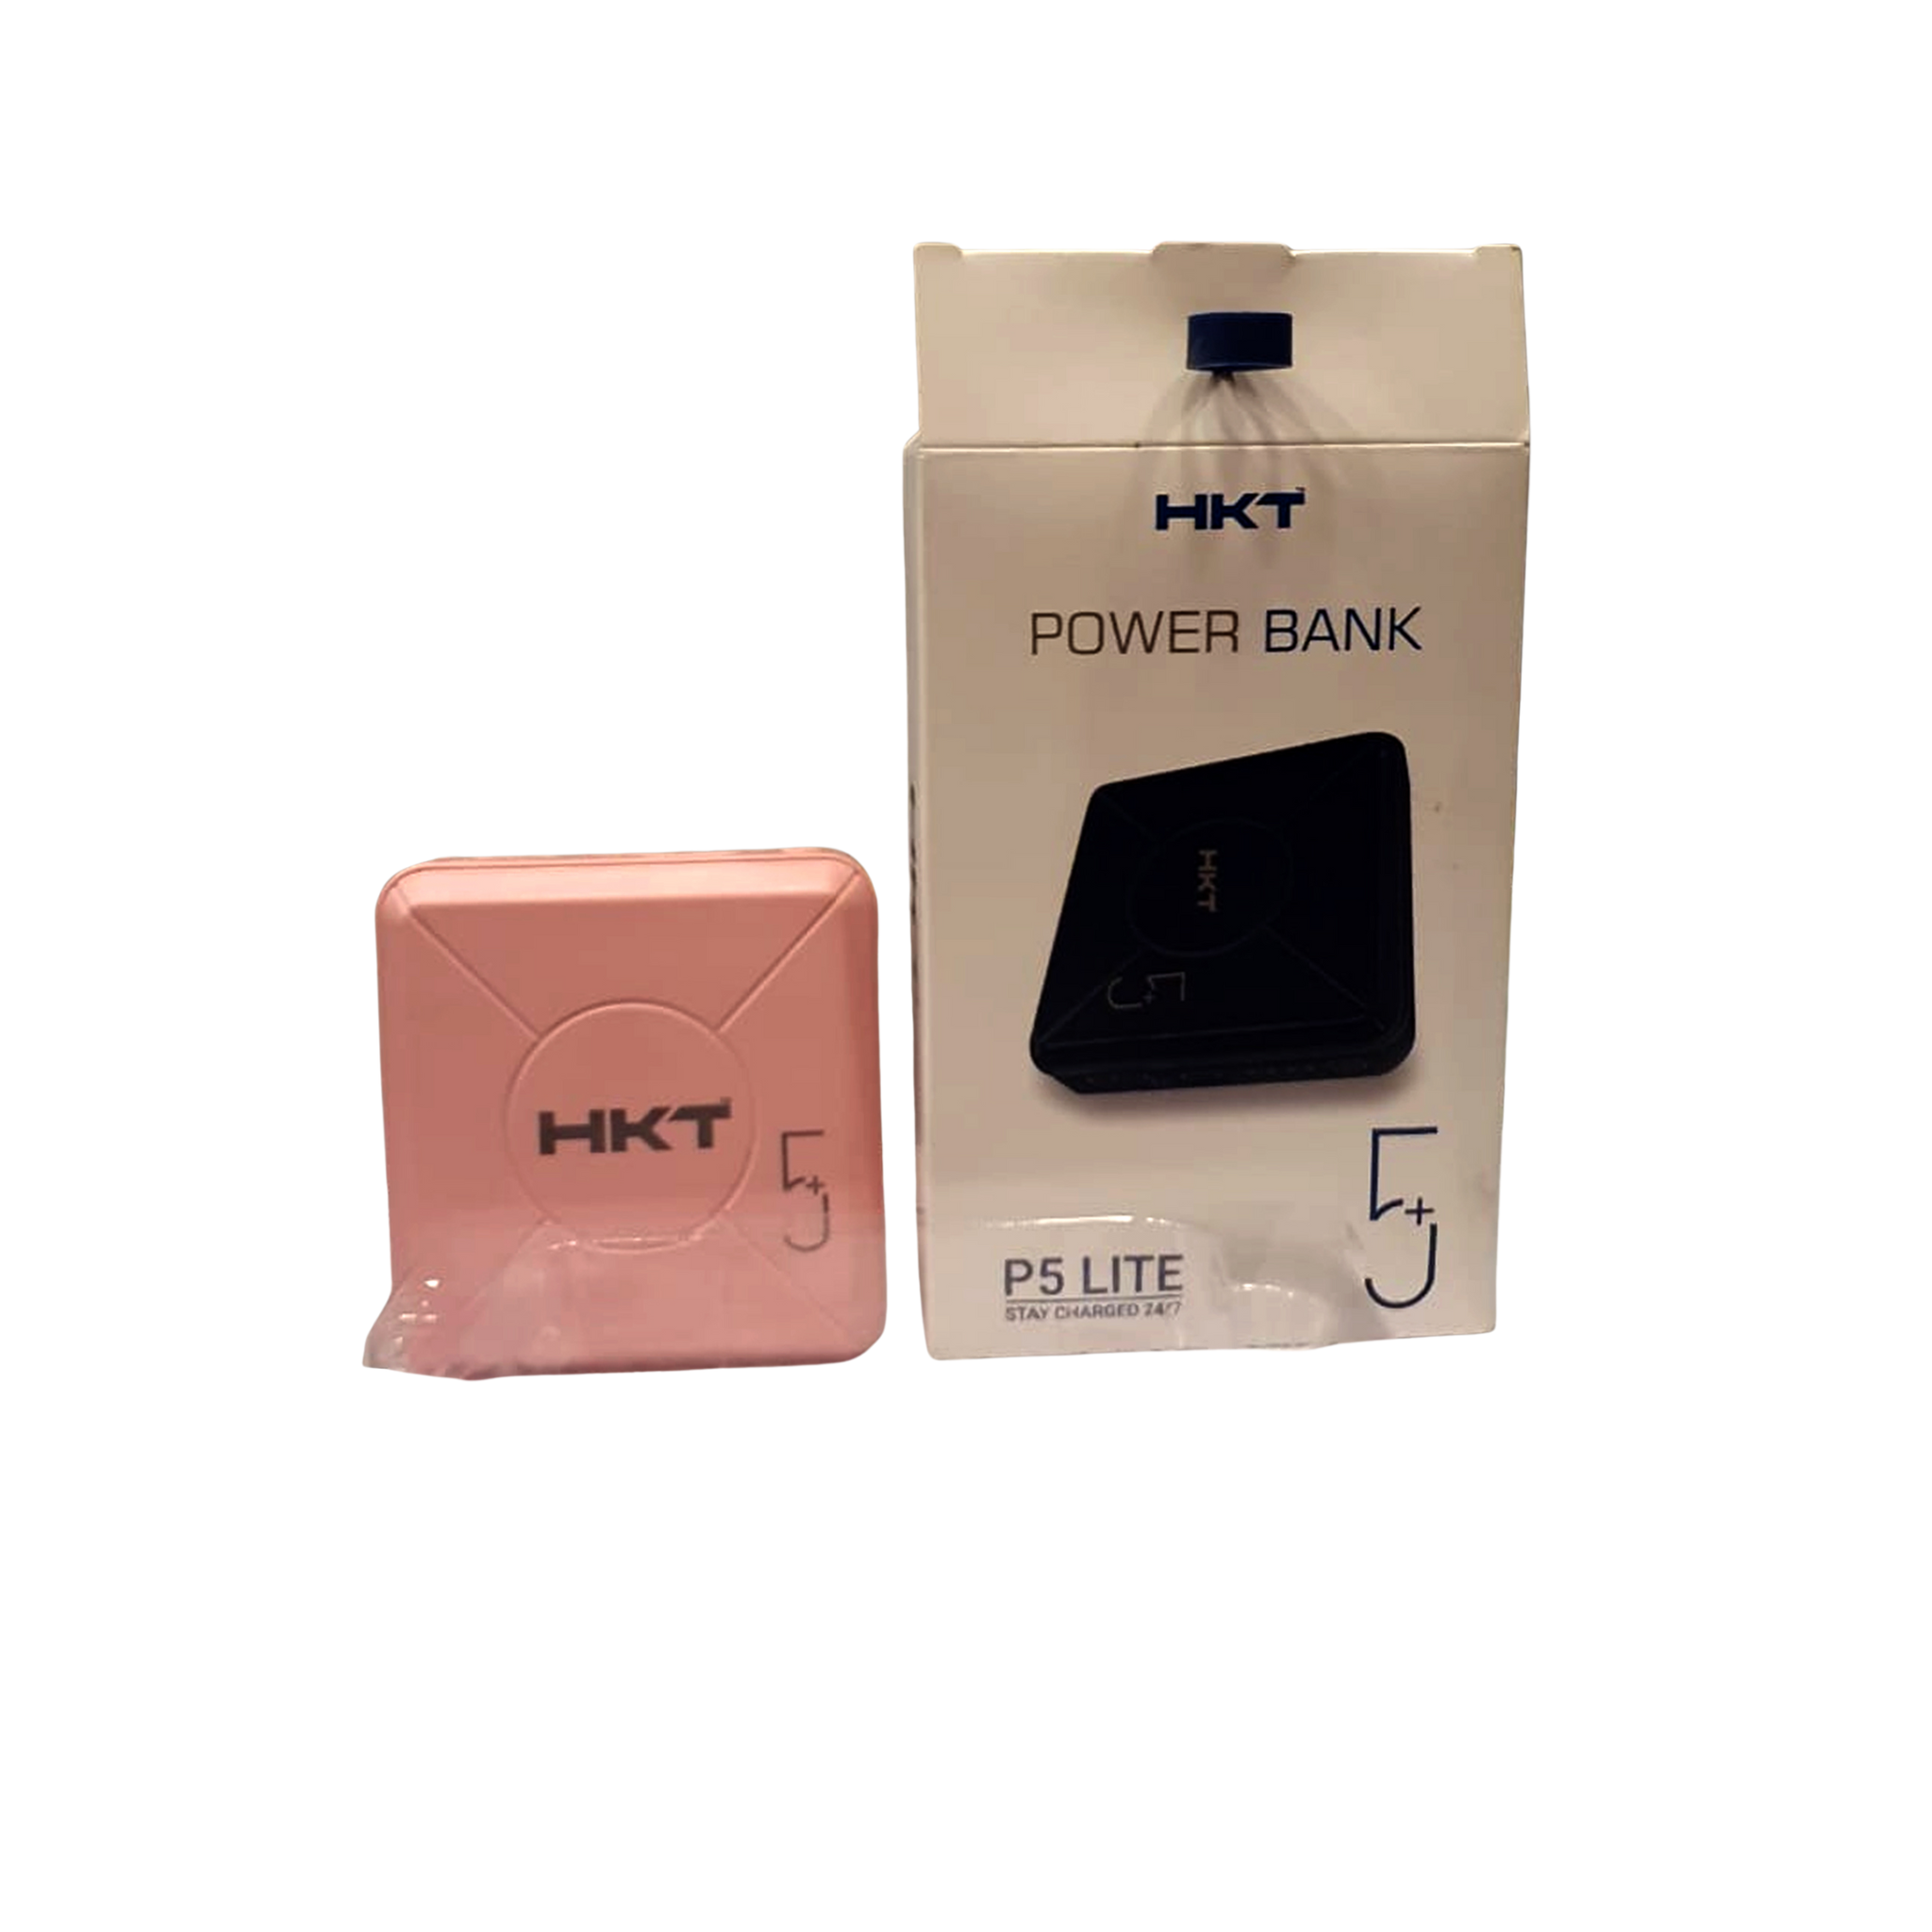 Power Bank, Branded 5000mAh, with Charging Cable